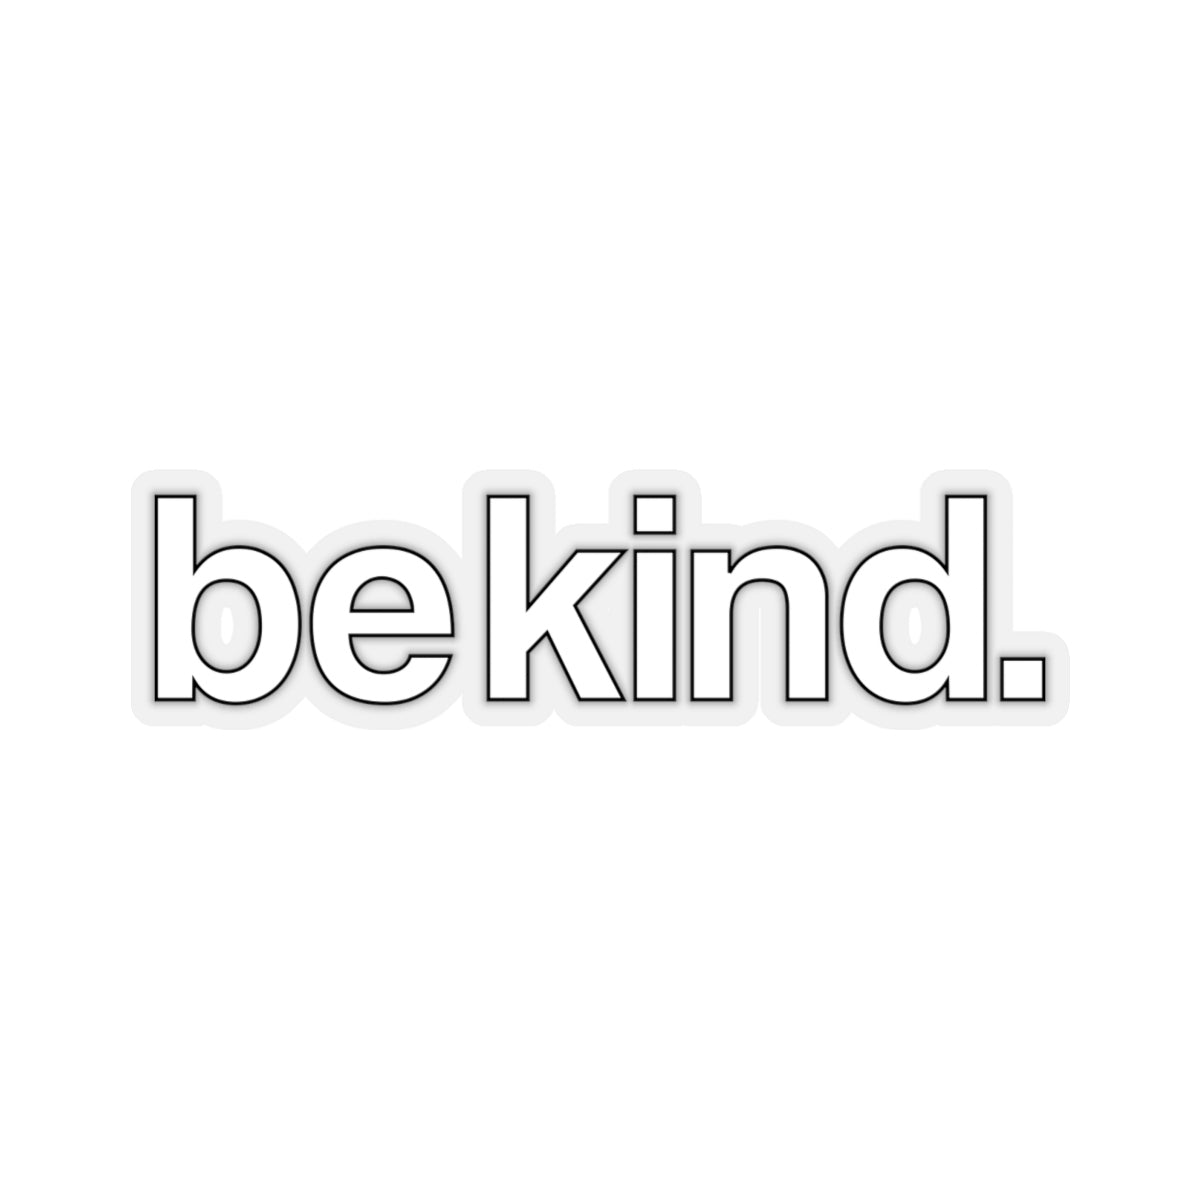 Be Kind Sticker, White Vinyl Decal, Bumper Sticker, Laptop Sign, Choose Kind, Bee Kind, Positive Kindness Kiss-Cut Stickers Starcove Fashion